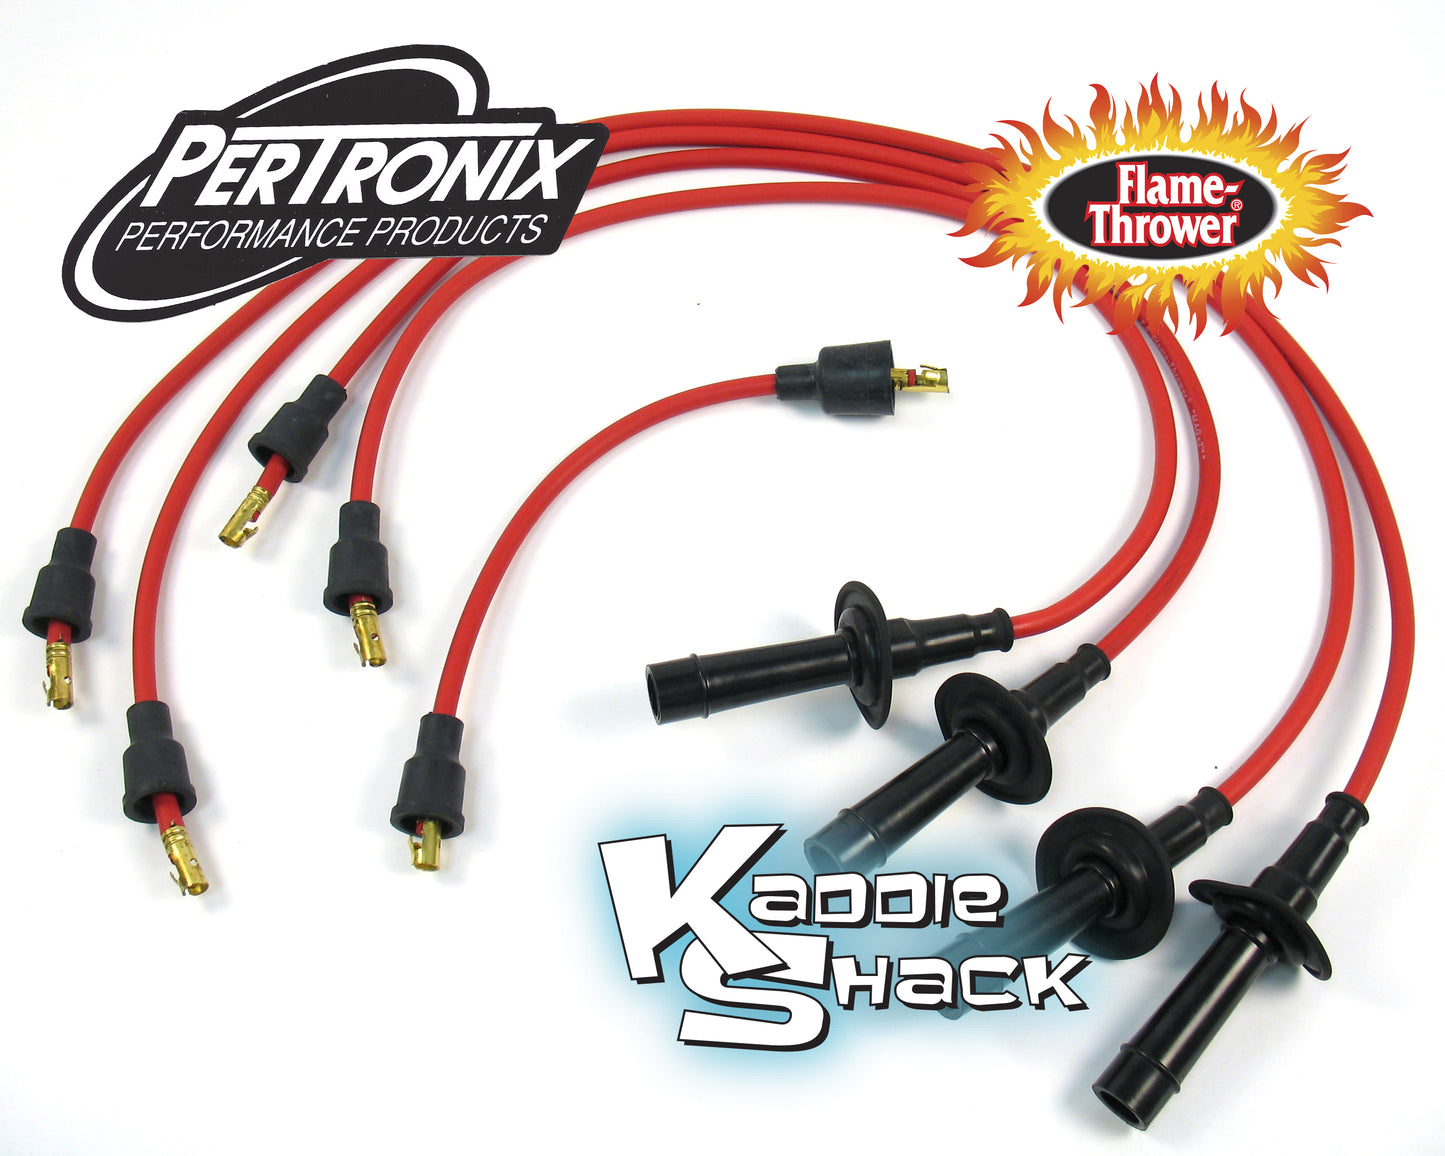 Pertronix Flame-Thrower 7mm Spark Plug Wires, Red